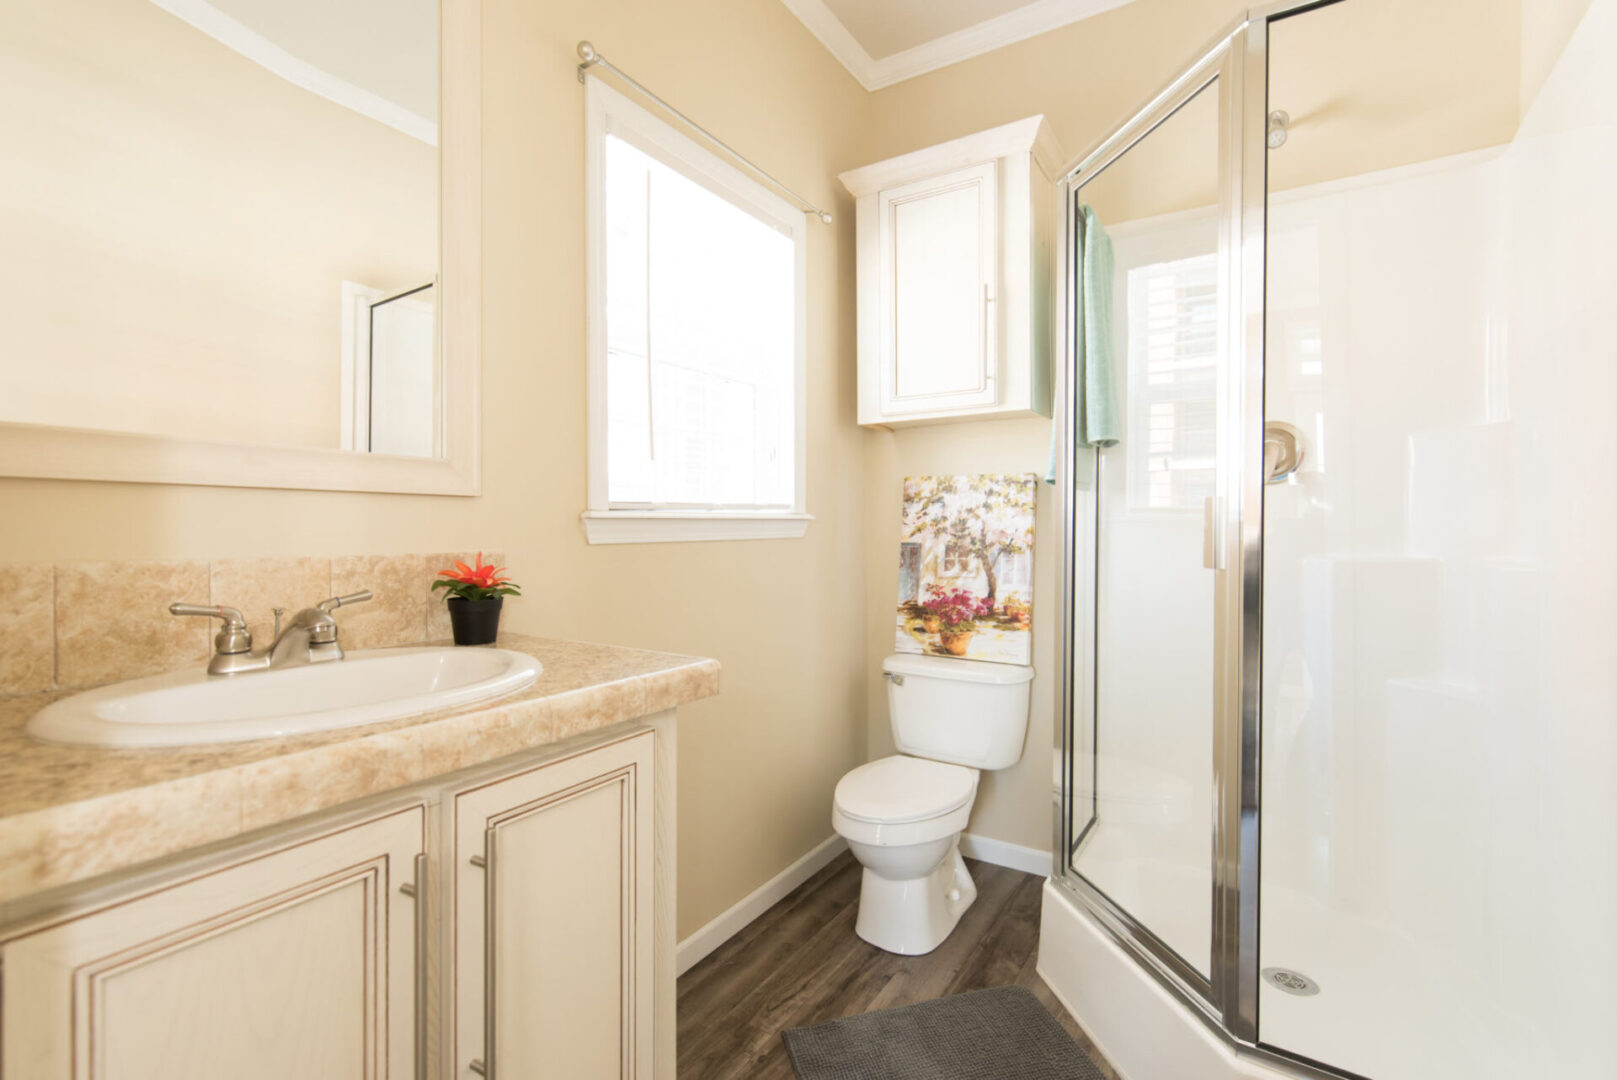 Cream-colored bathroom with a glass shower door, porcelain sink and toilet, and white cabinetries